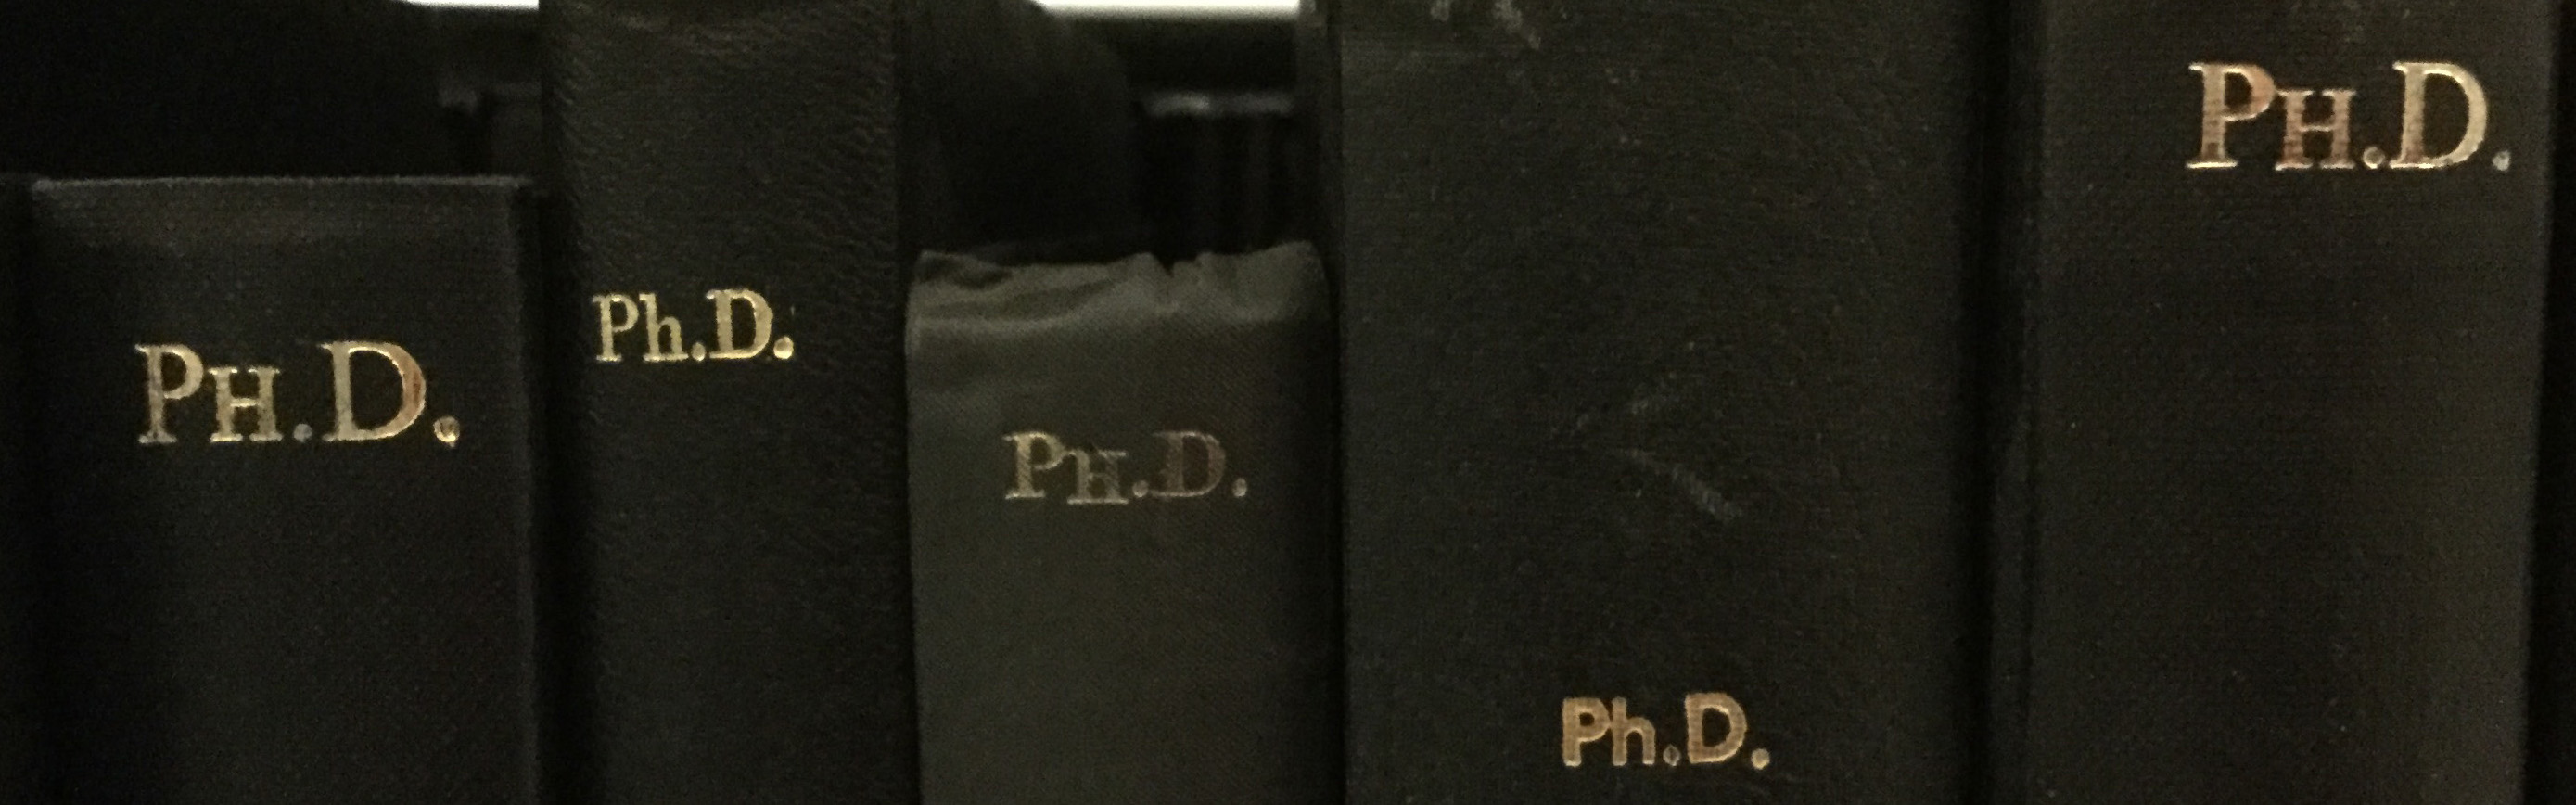 A Survival Guide to a PhD